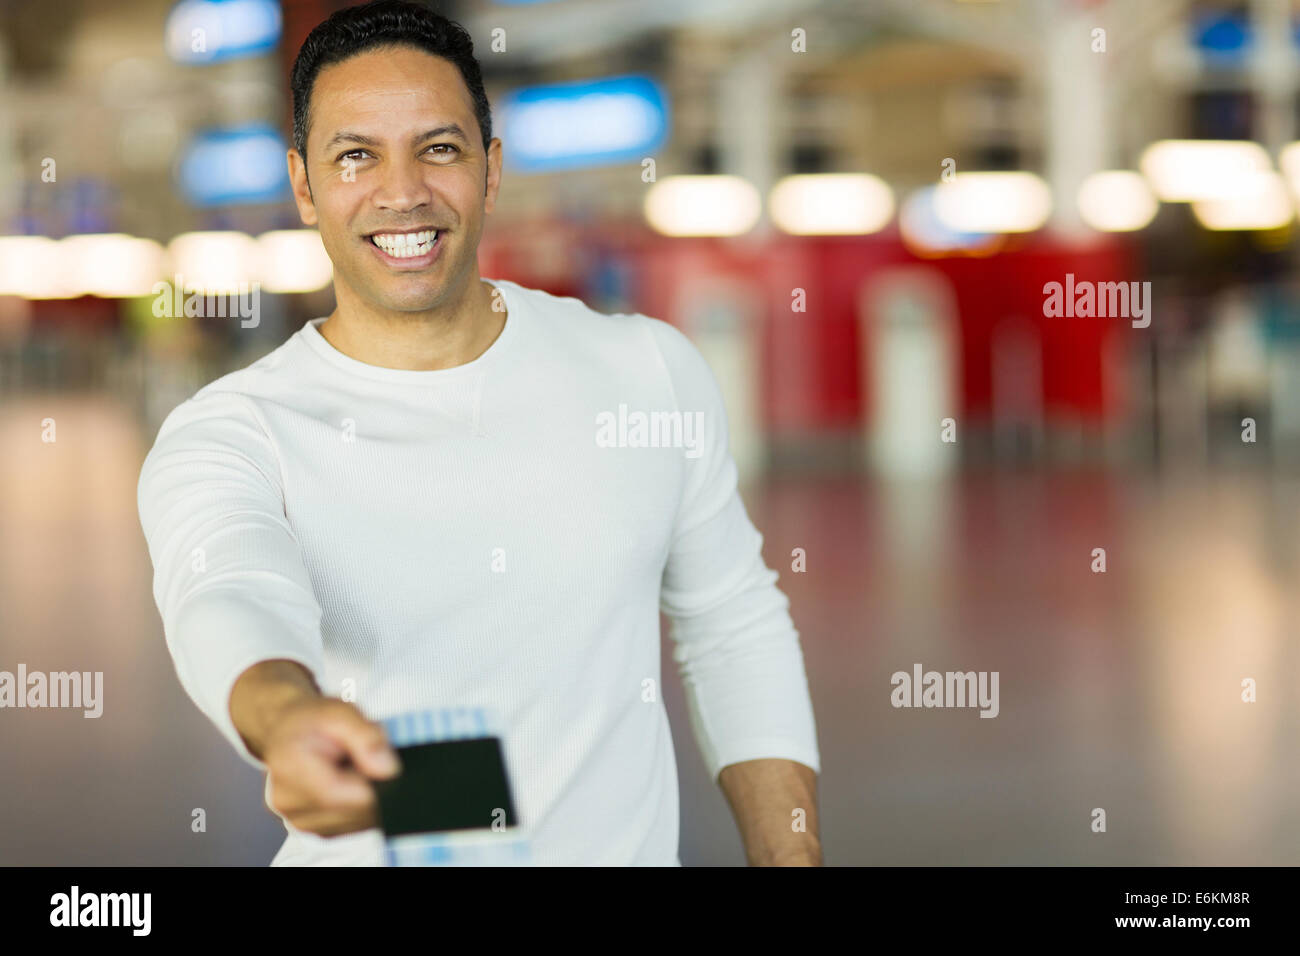 handsome mature man handing over air ticket at check in counter Stock Photo